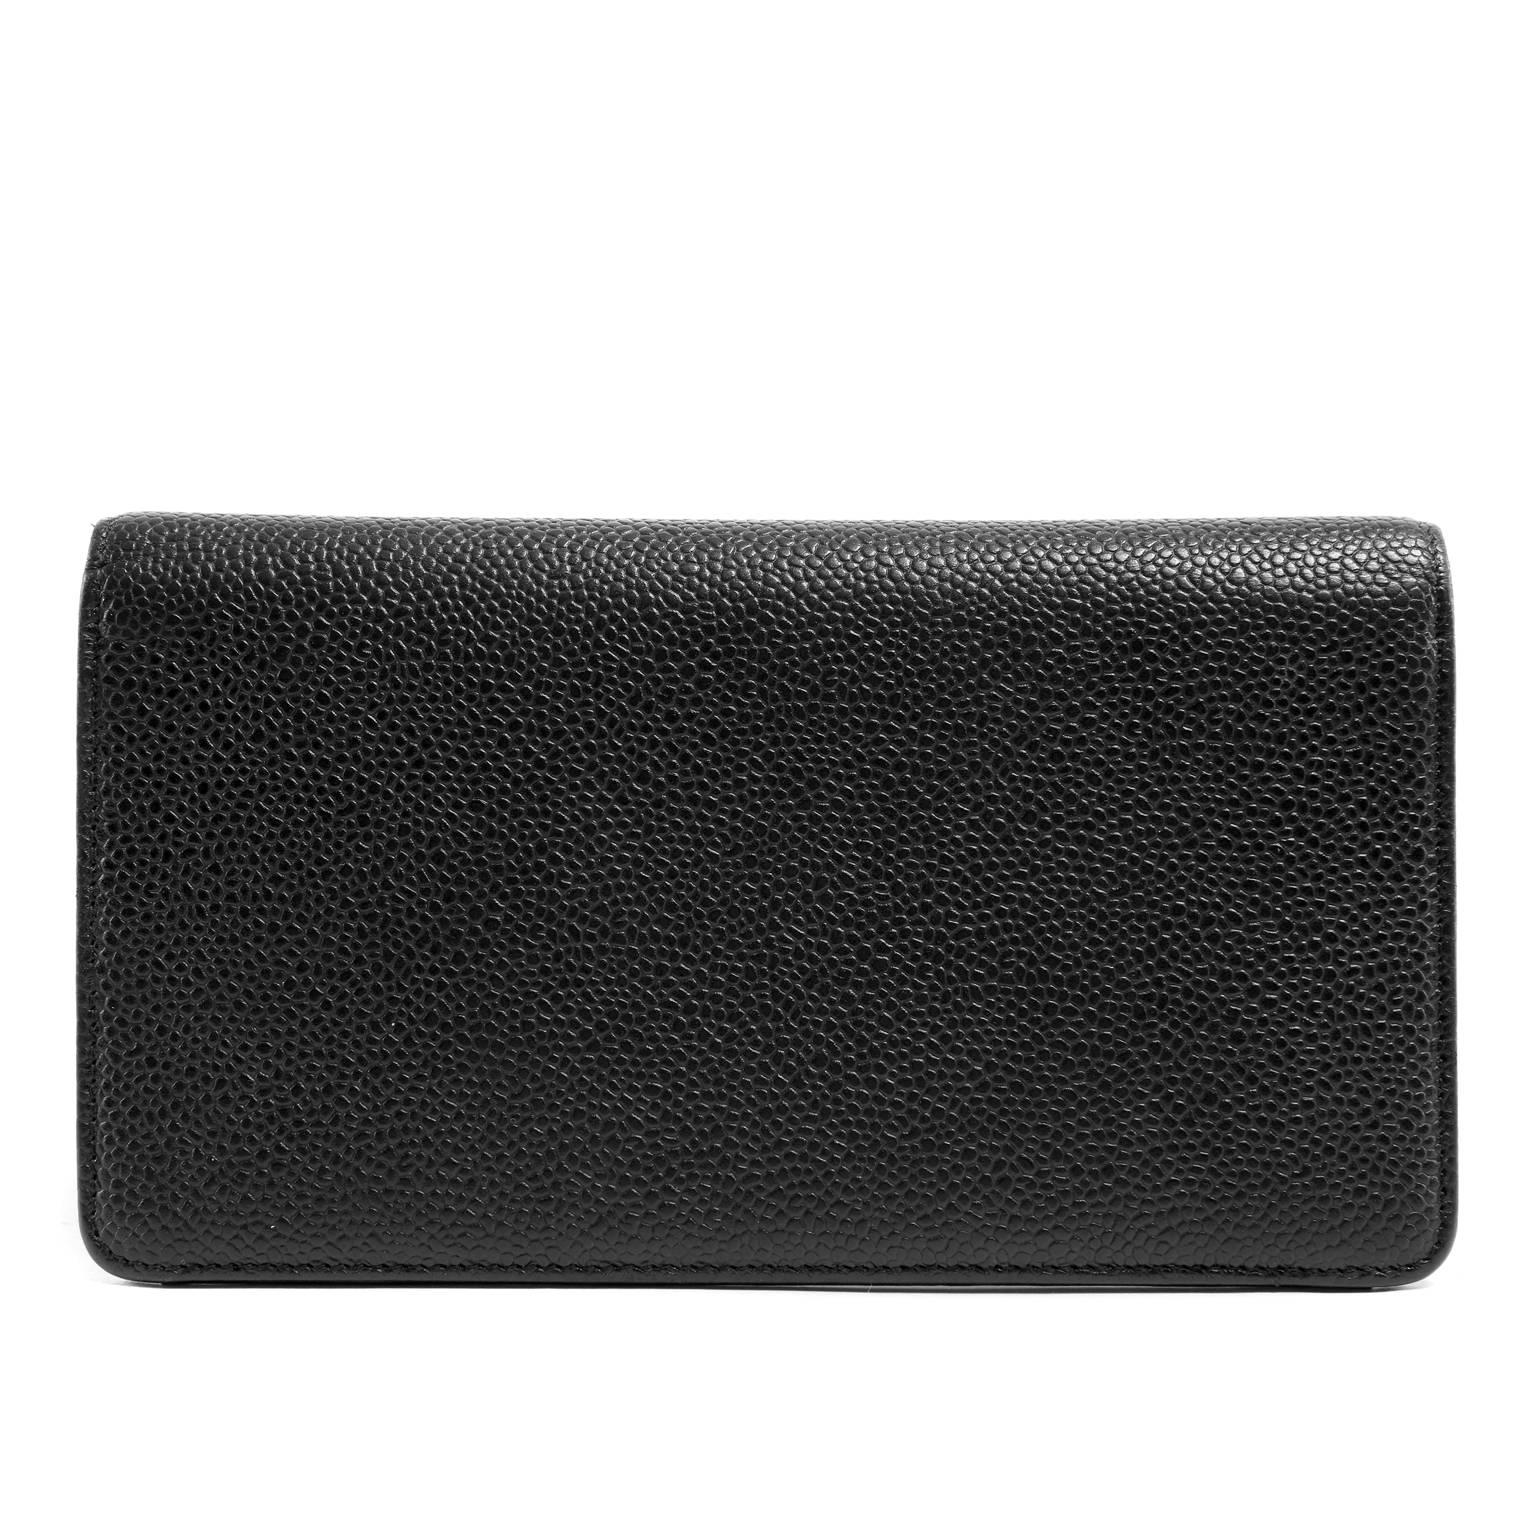 Chanel Black Caviar Leather Portfolio Wallet- PRISTINE; Never Carried
Simply elegant, this roomy wallet can be carried either men or women. 
 
Black caviar leather is textured and durable; an excellent leather for an often handles accessory. 